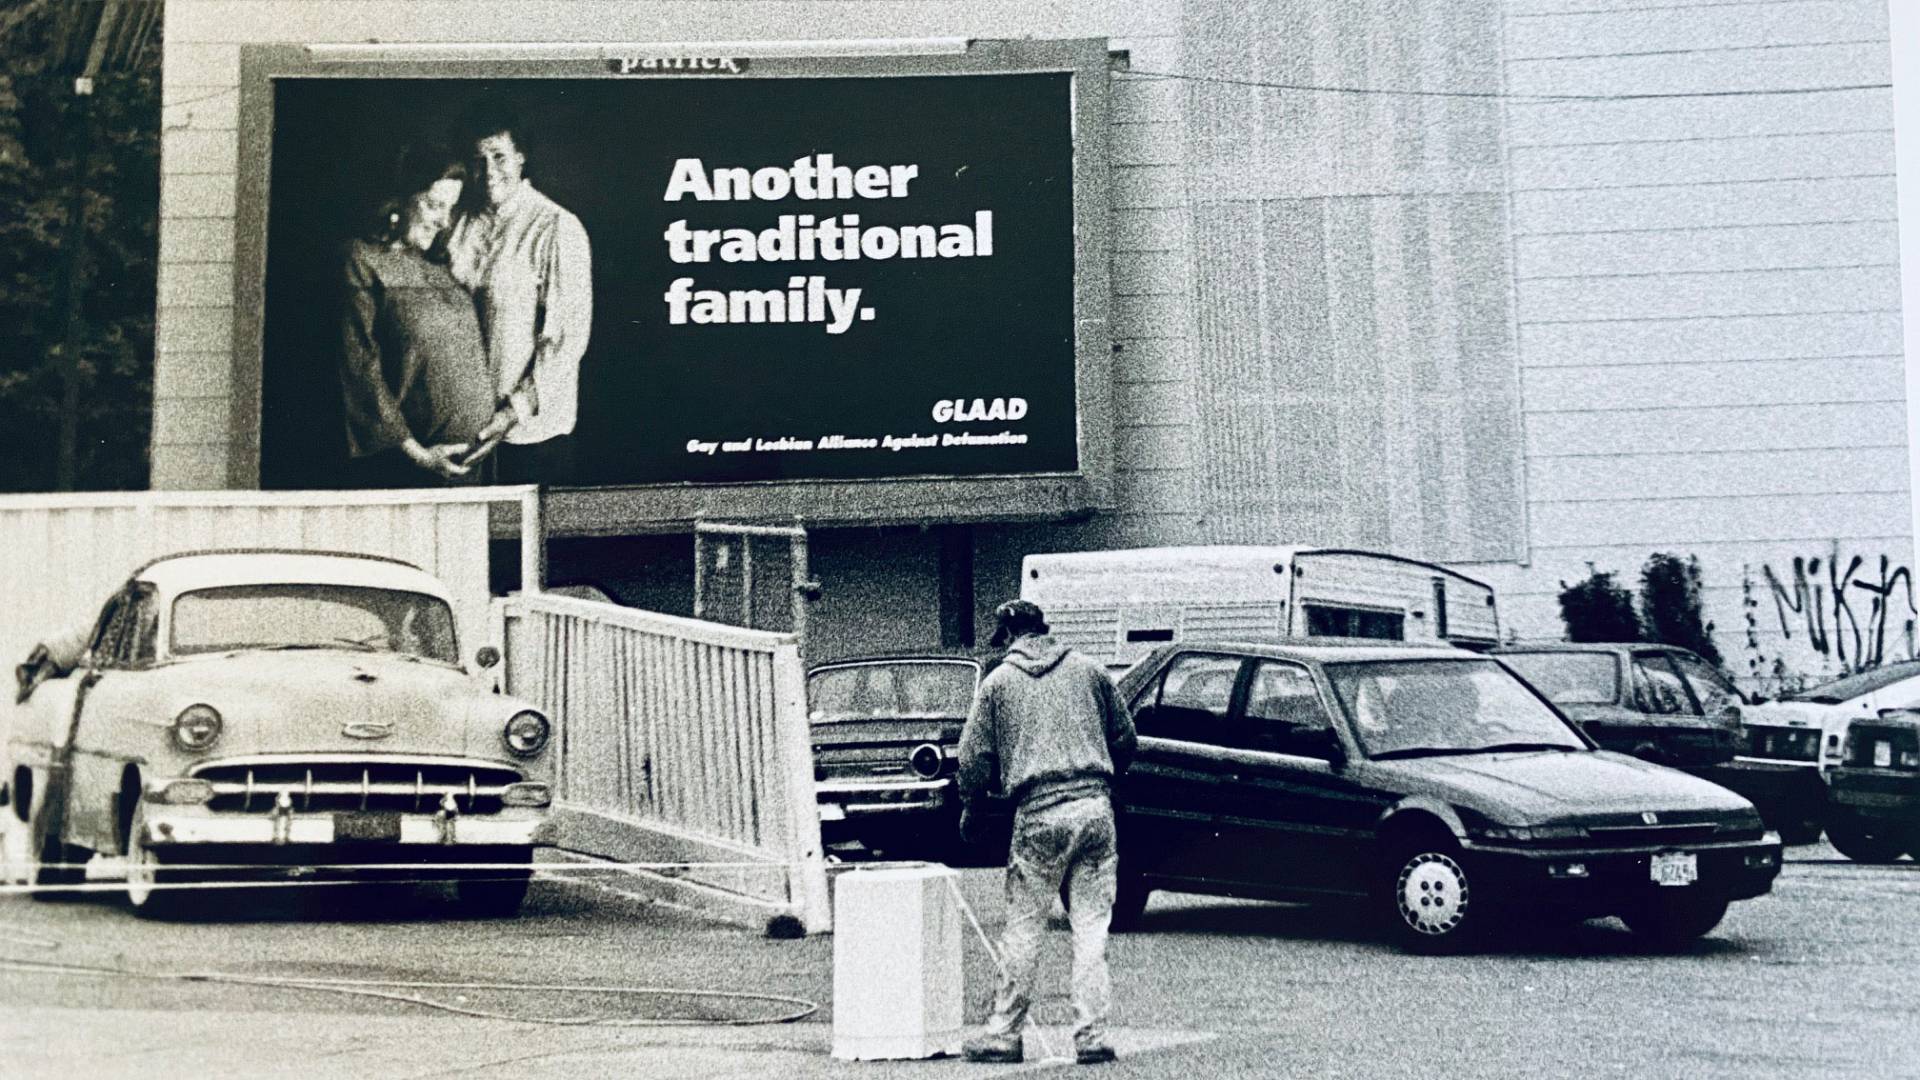 The billboard, photographed by Chloe Atkins and featuring Pat and Karen Norman, on the side of a building in 1992. Courtesy Chloe Atkins